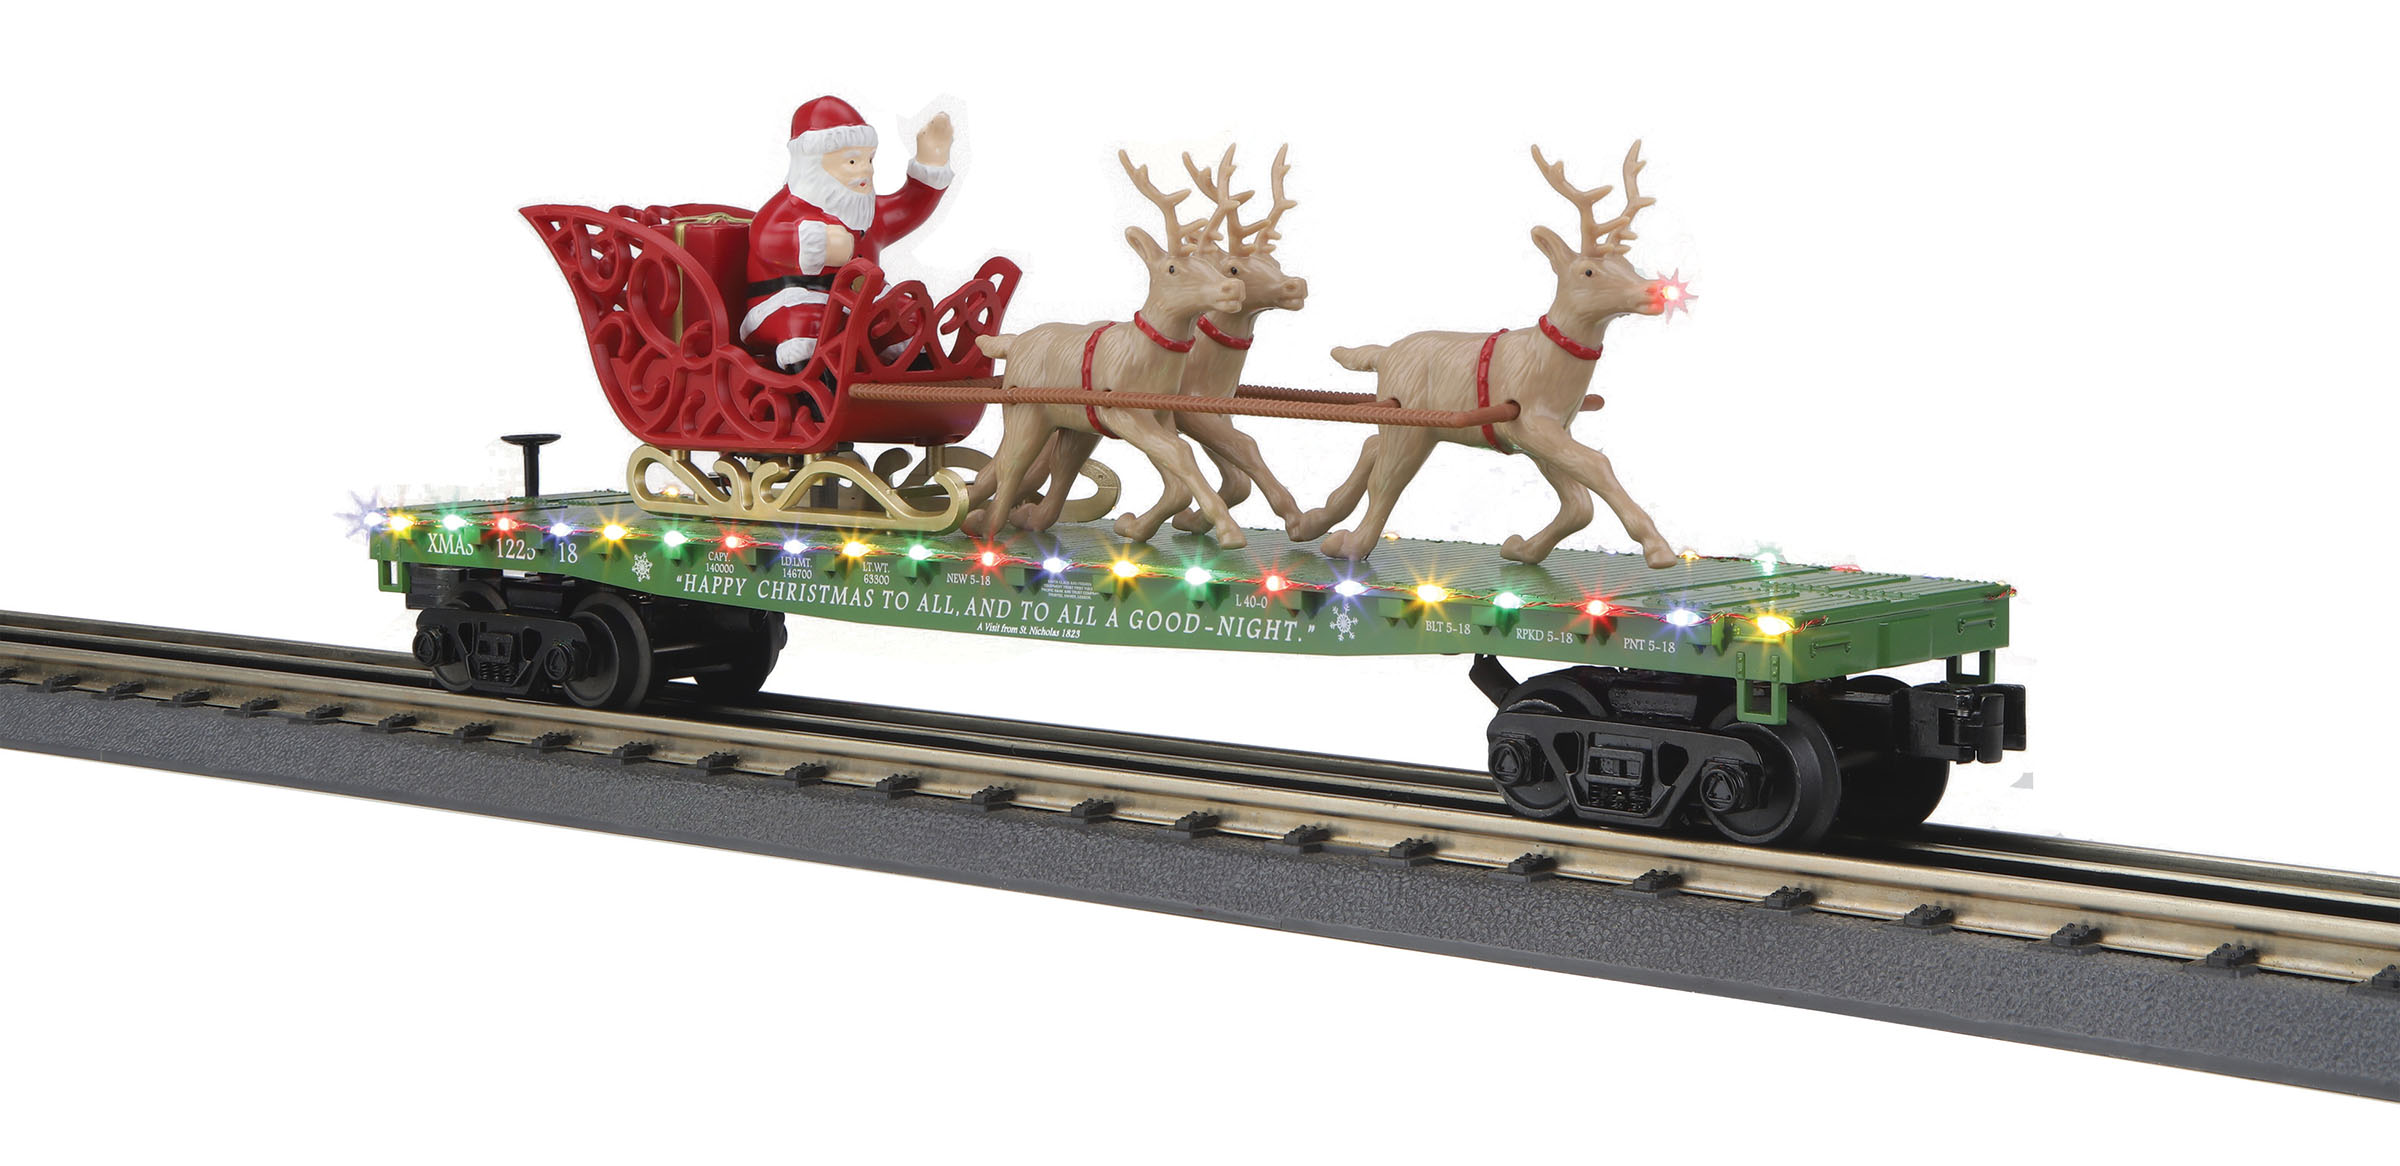 MTH RAIL KING TOWN SQUARE CHRISTMAS TREE LED LIGHTS O GAUGE lighted 30-11088 NEW 